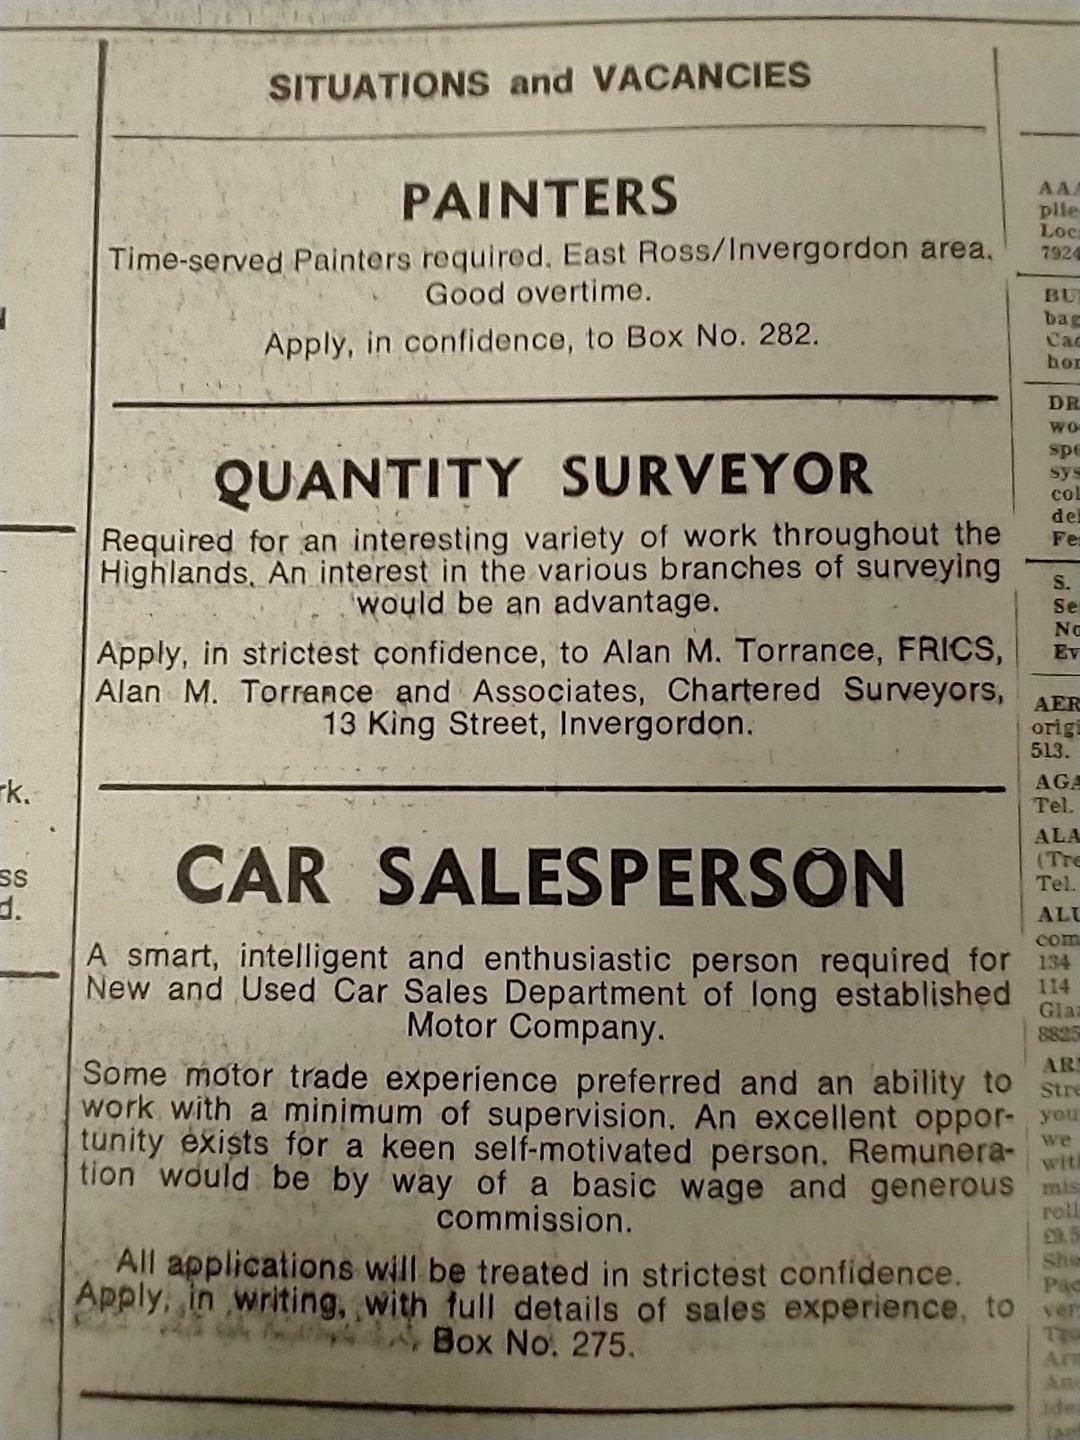 Situations vacant back in 1984.